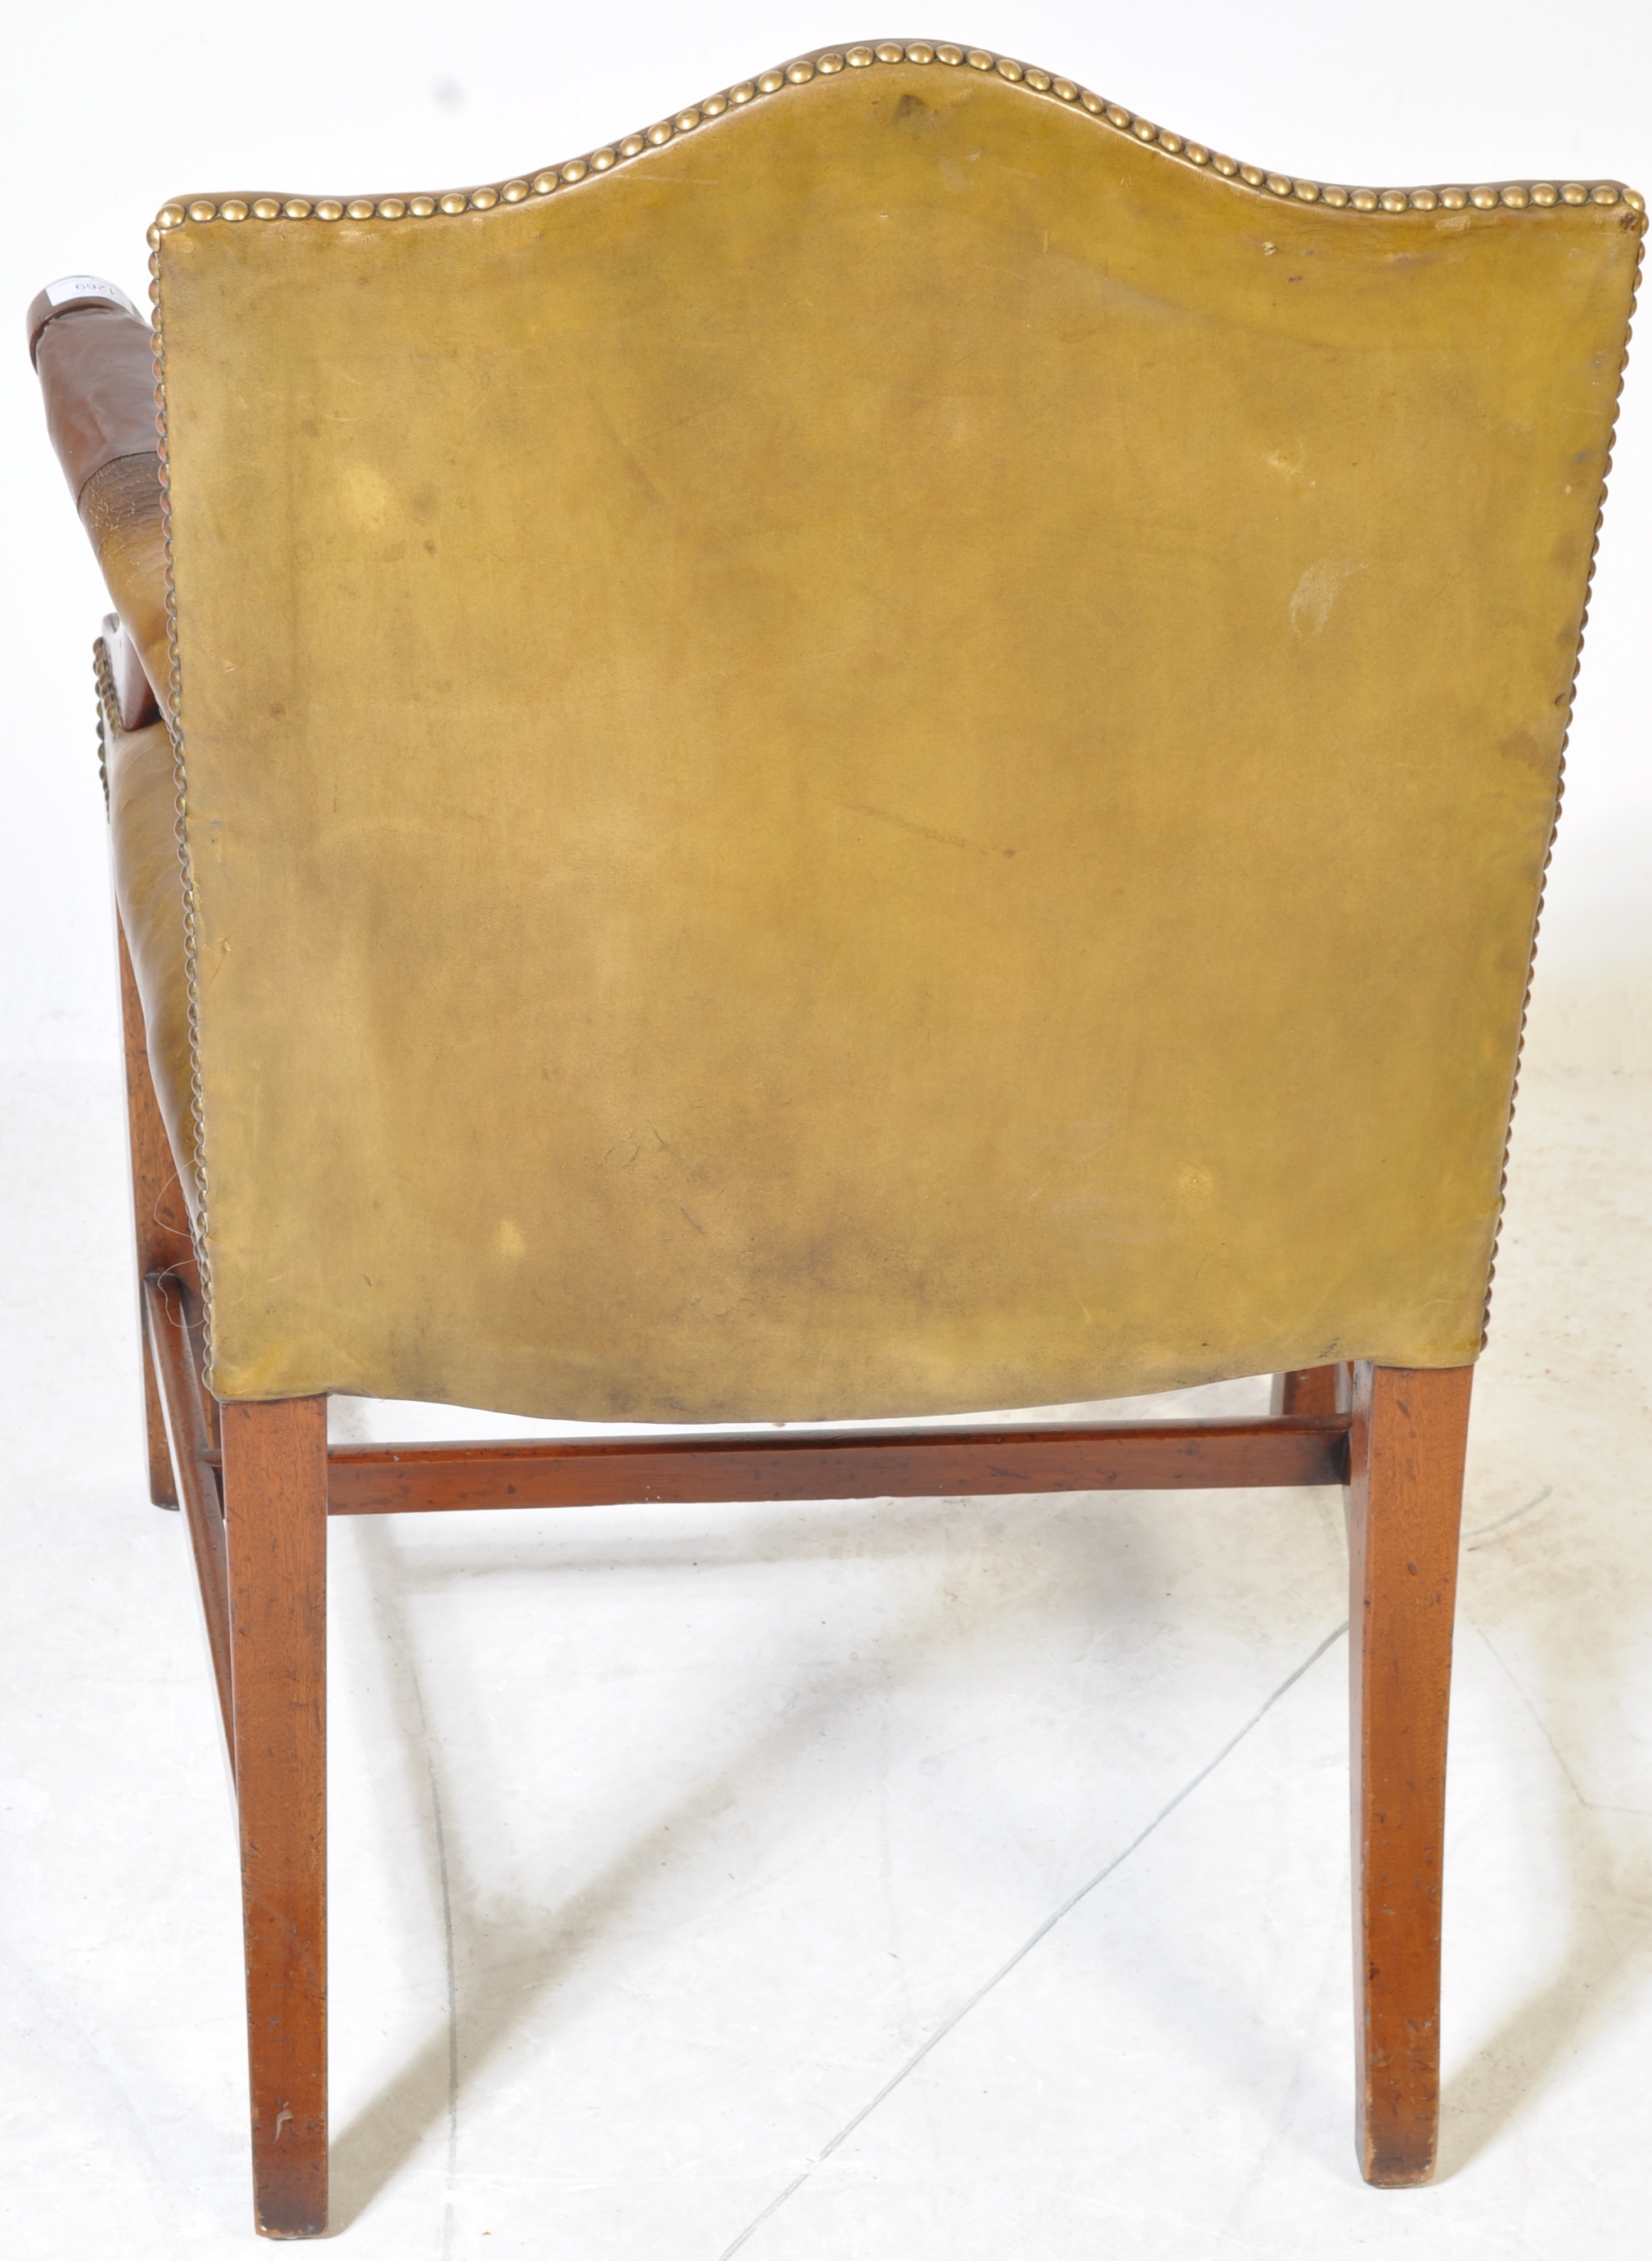 MAHOGANY AND LEATHER GAINSBOROUGH DESK ARMCHAIR - Image 5 of 5